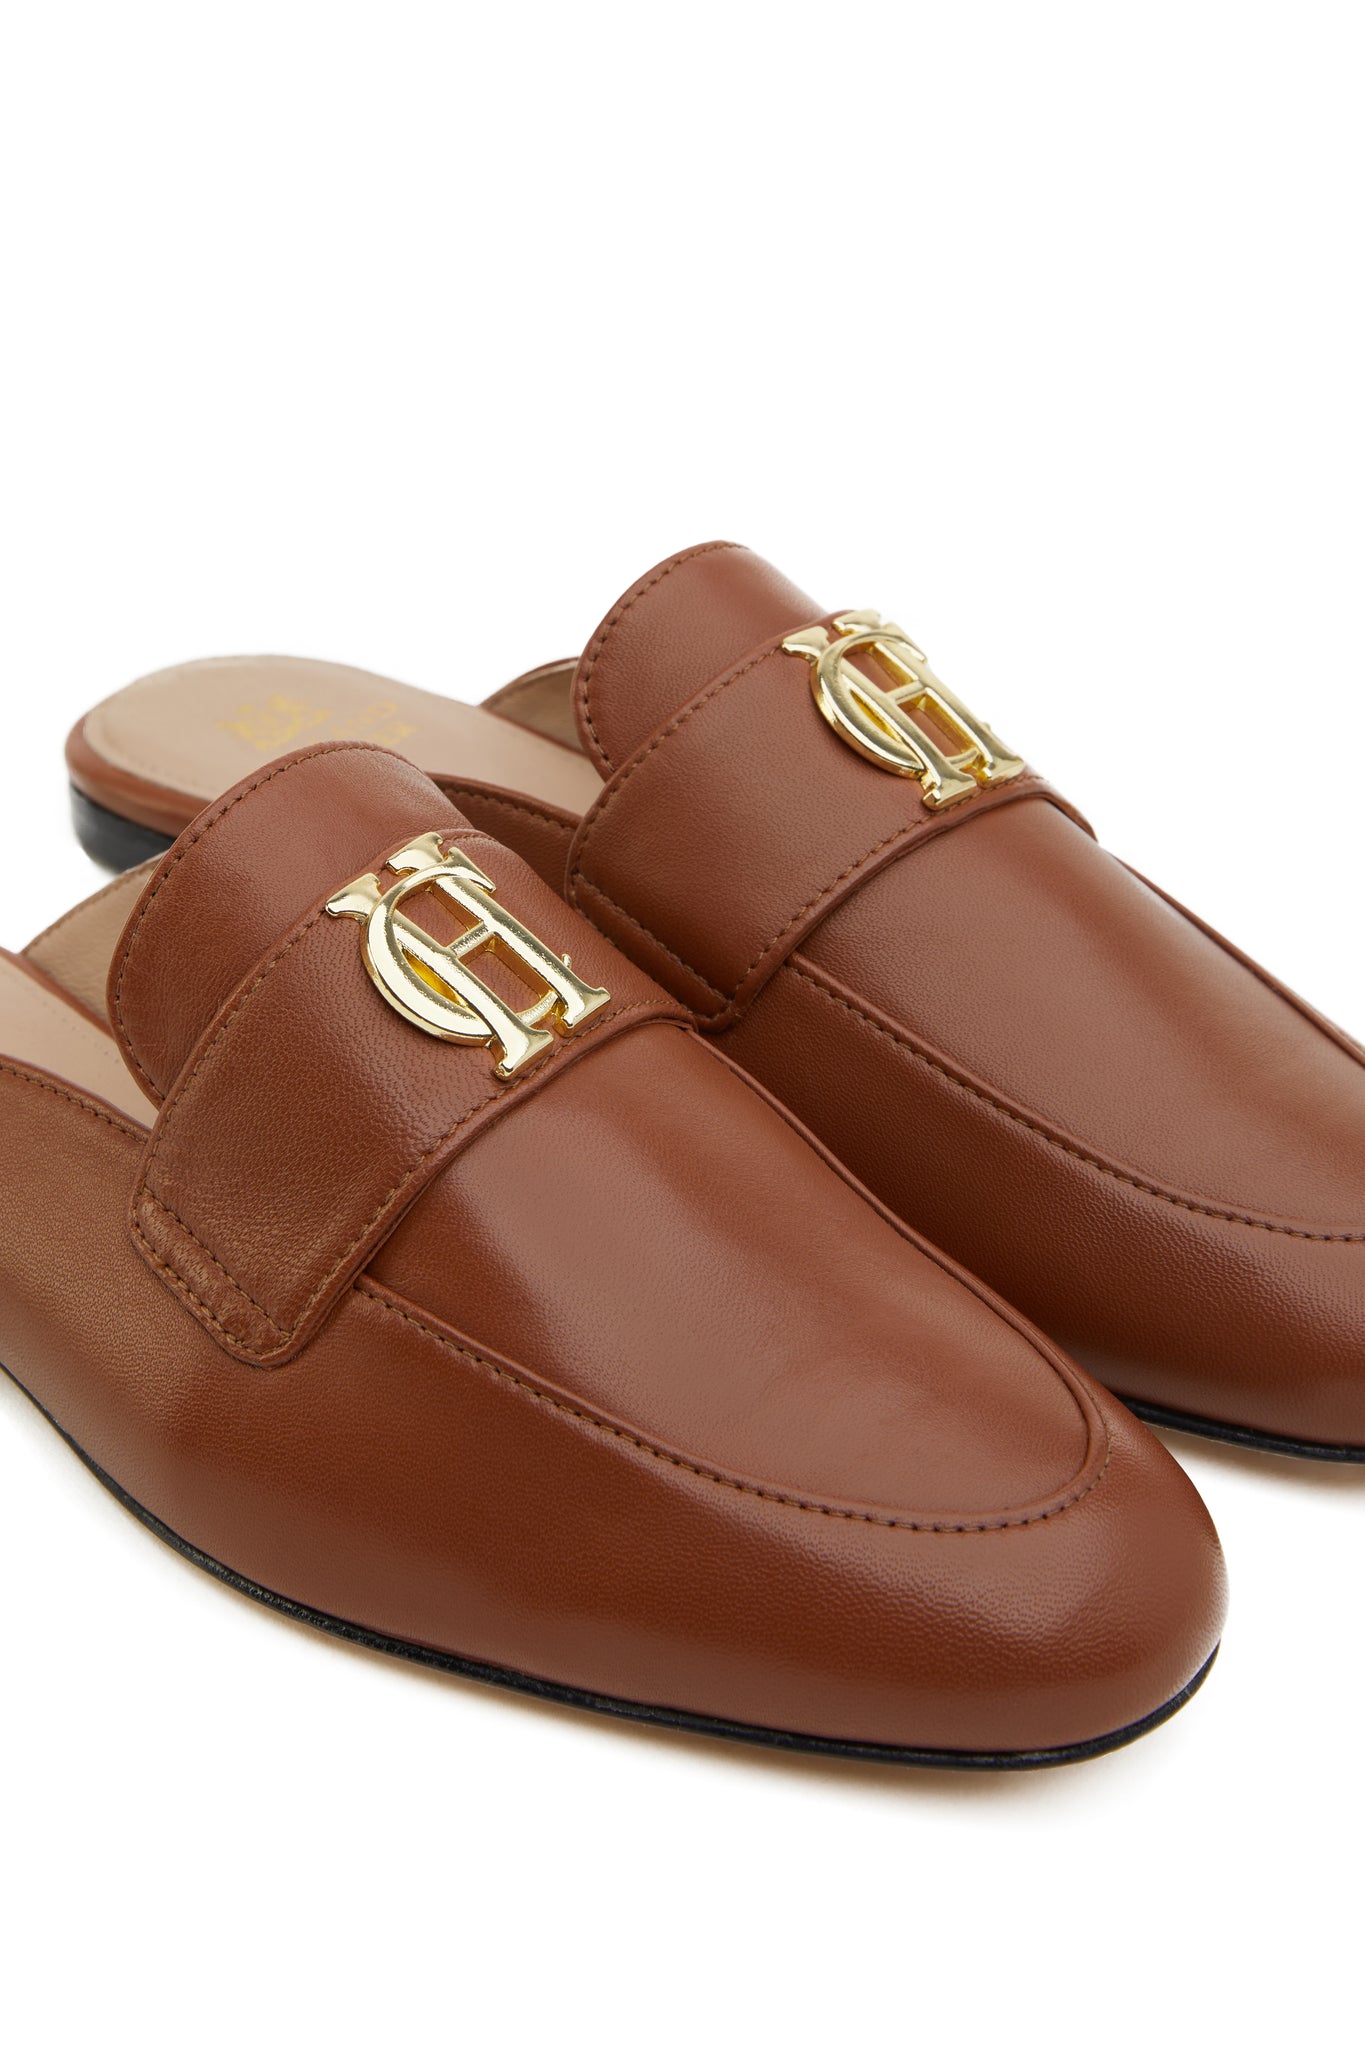 Close up of gold hardware on tan leather backless loafers with a slightly pointed toe